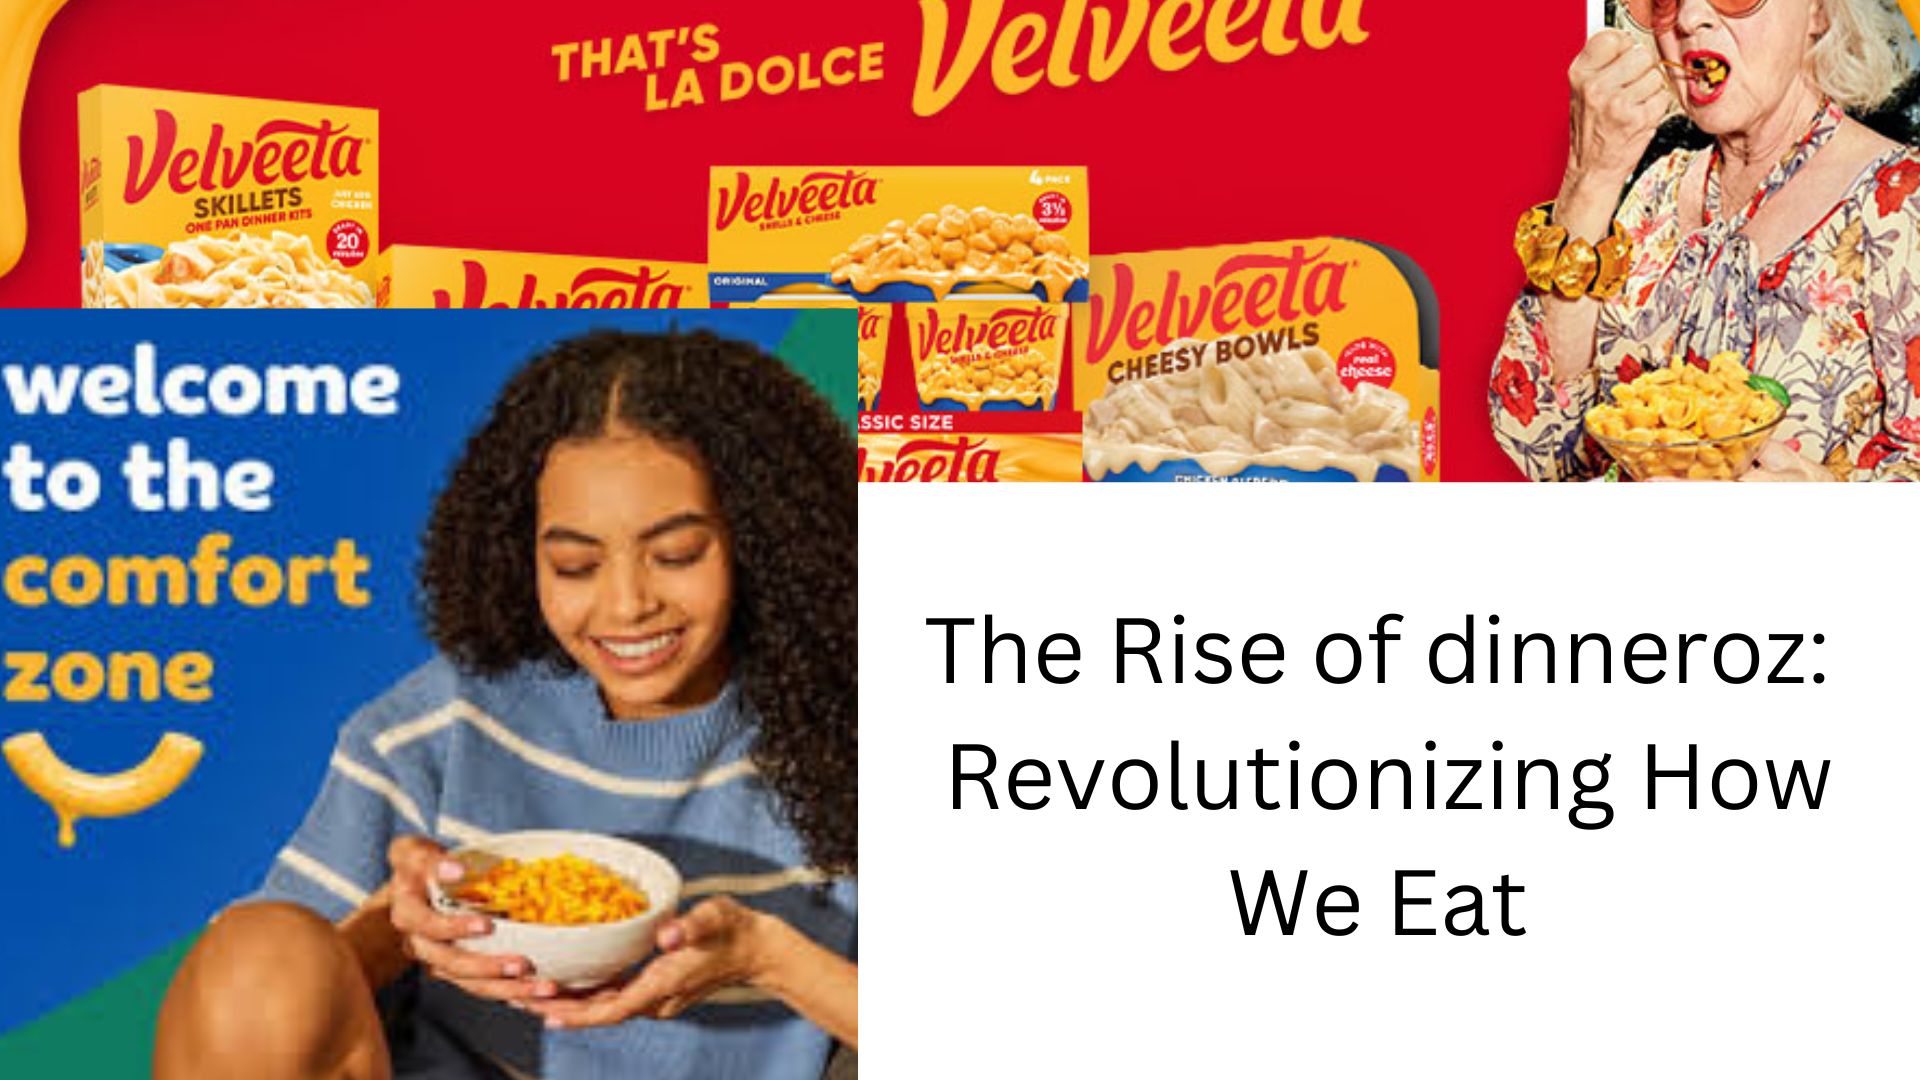 The Rise of dinneroz: Revolutionizing How We Eat